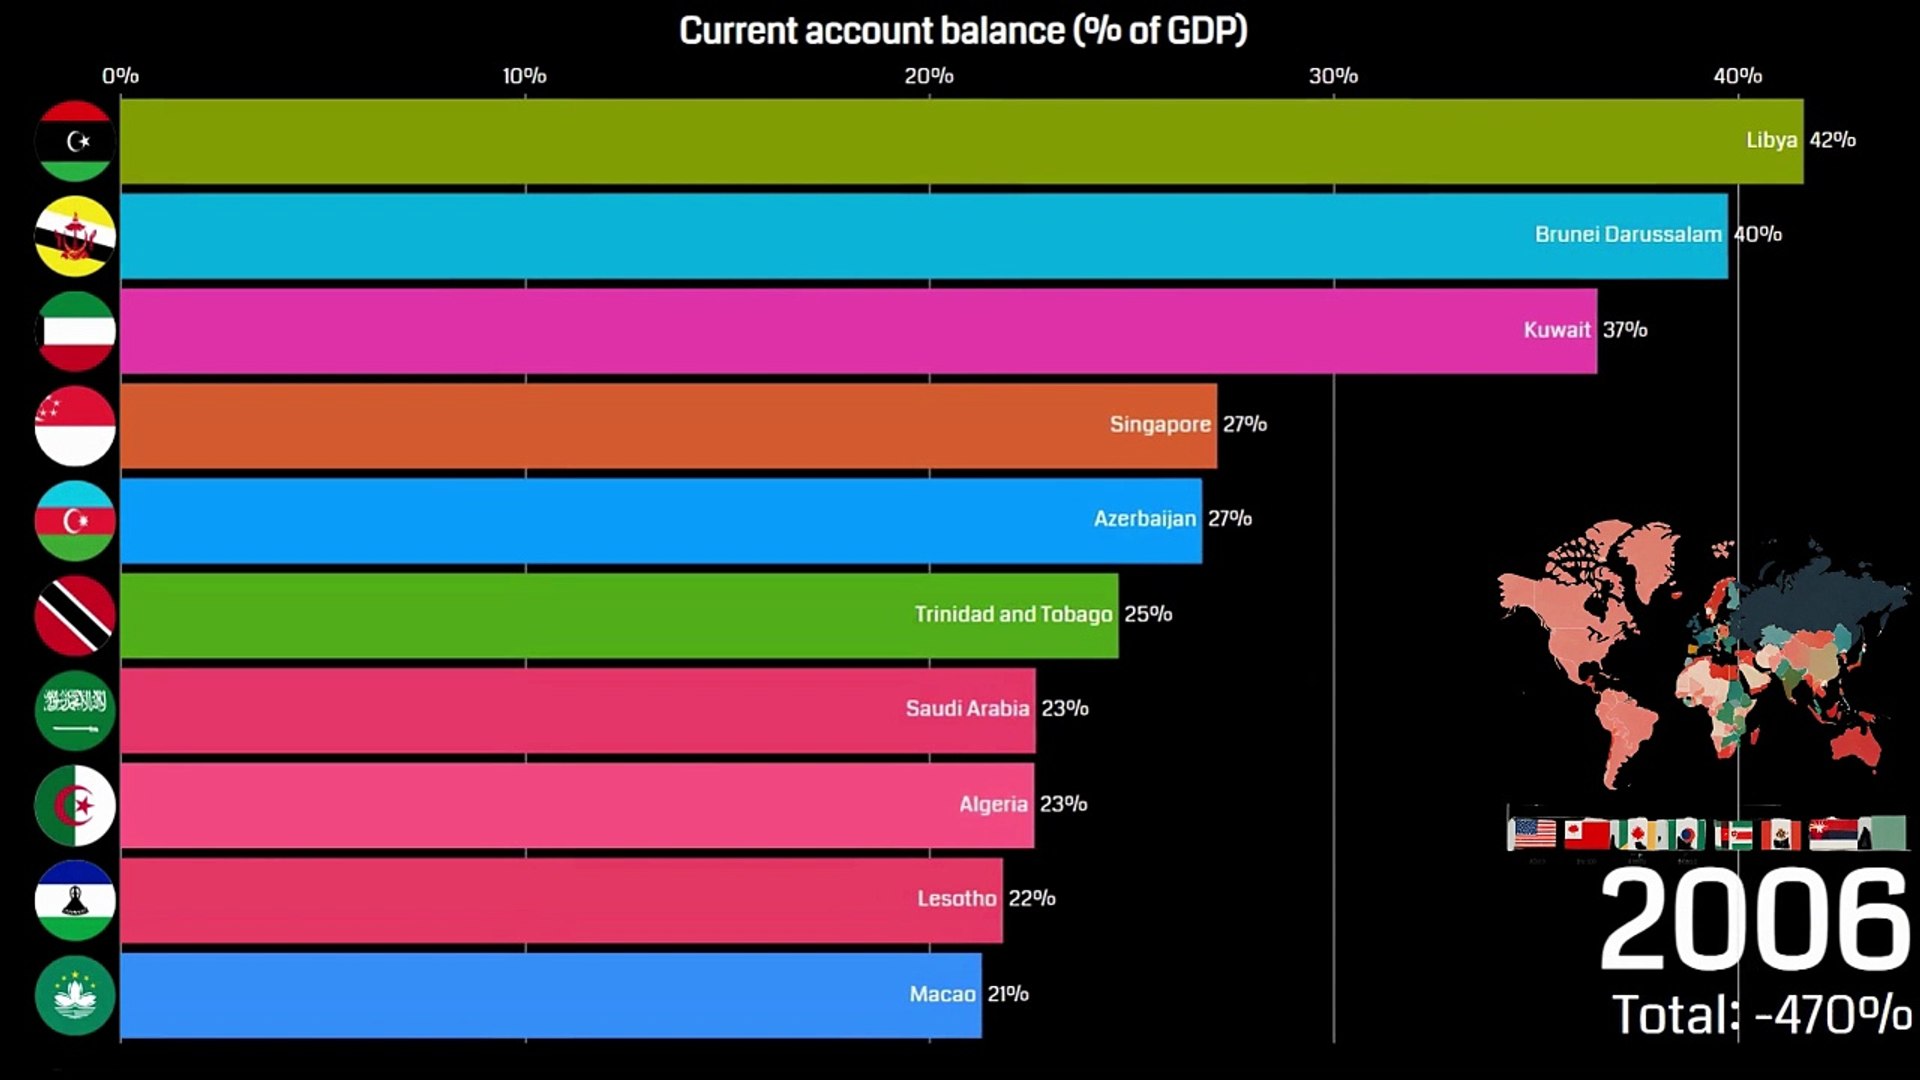 Top 10 countries with highest current account balance data is beautiful